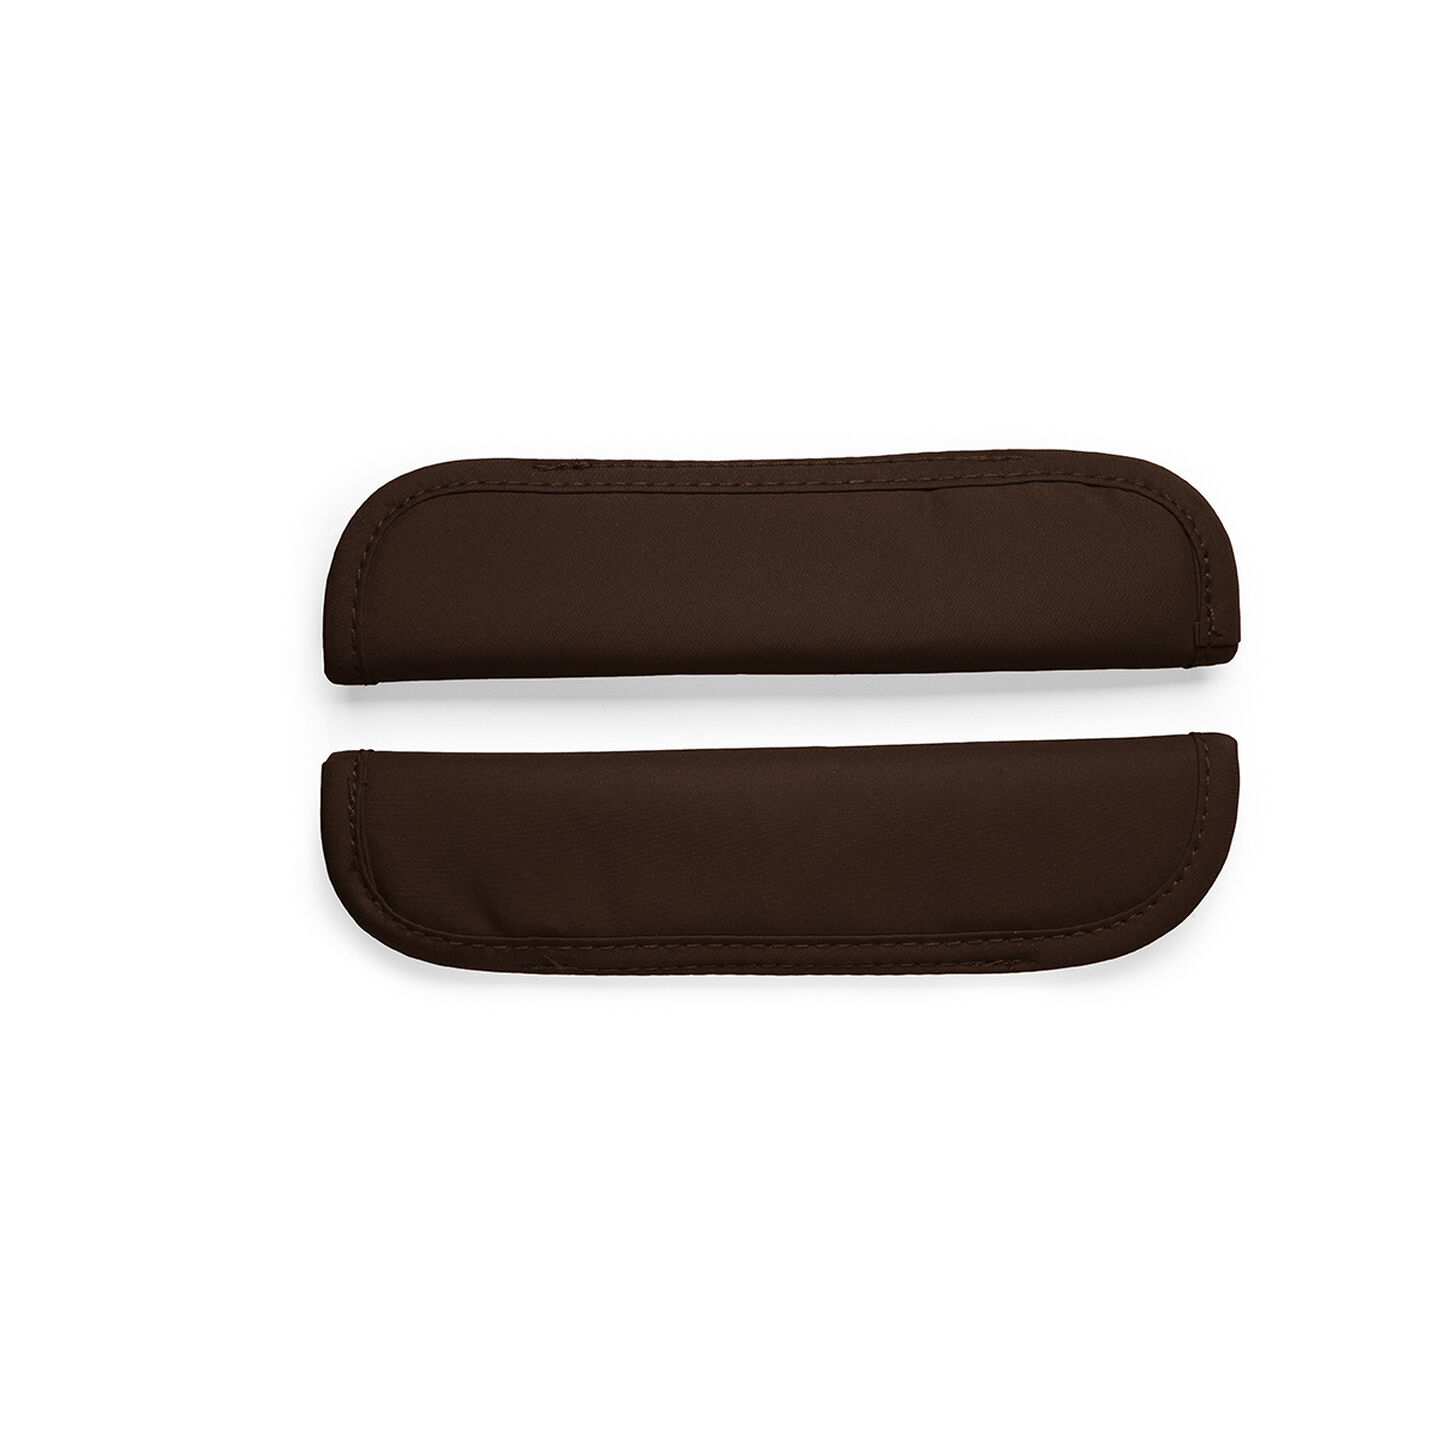 Stokke® Xplory® Selskydd Brown, Brown, mainview view 1